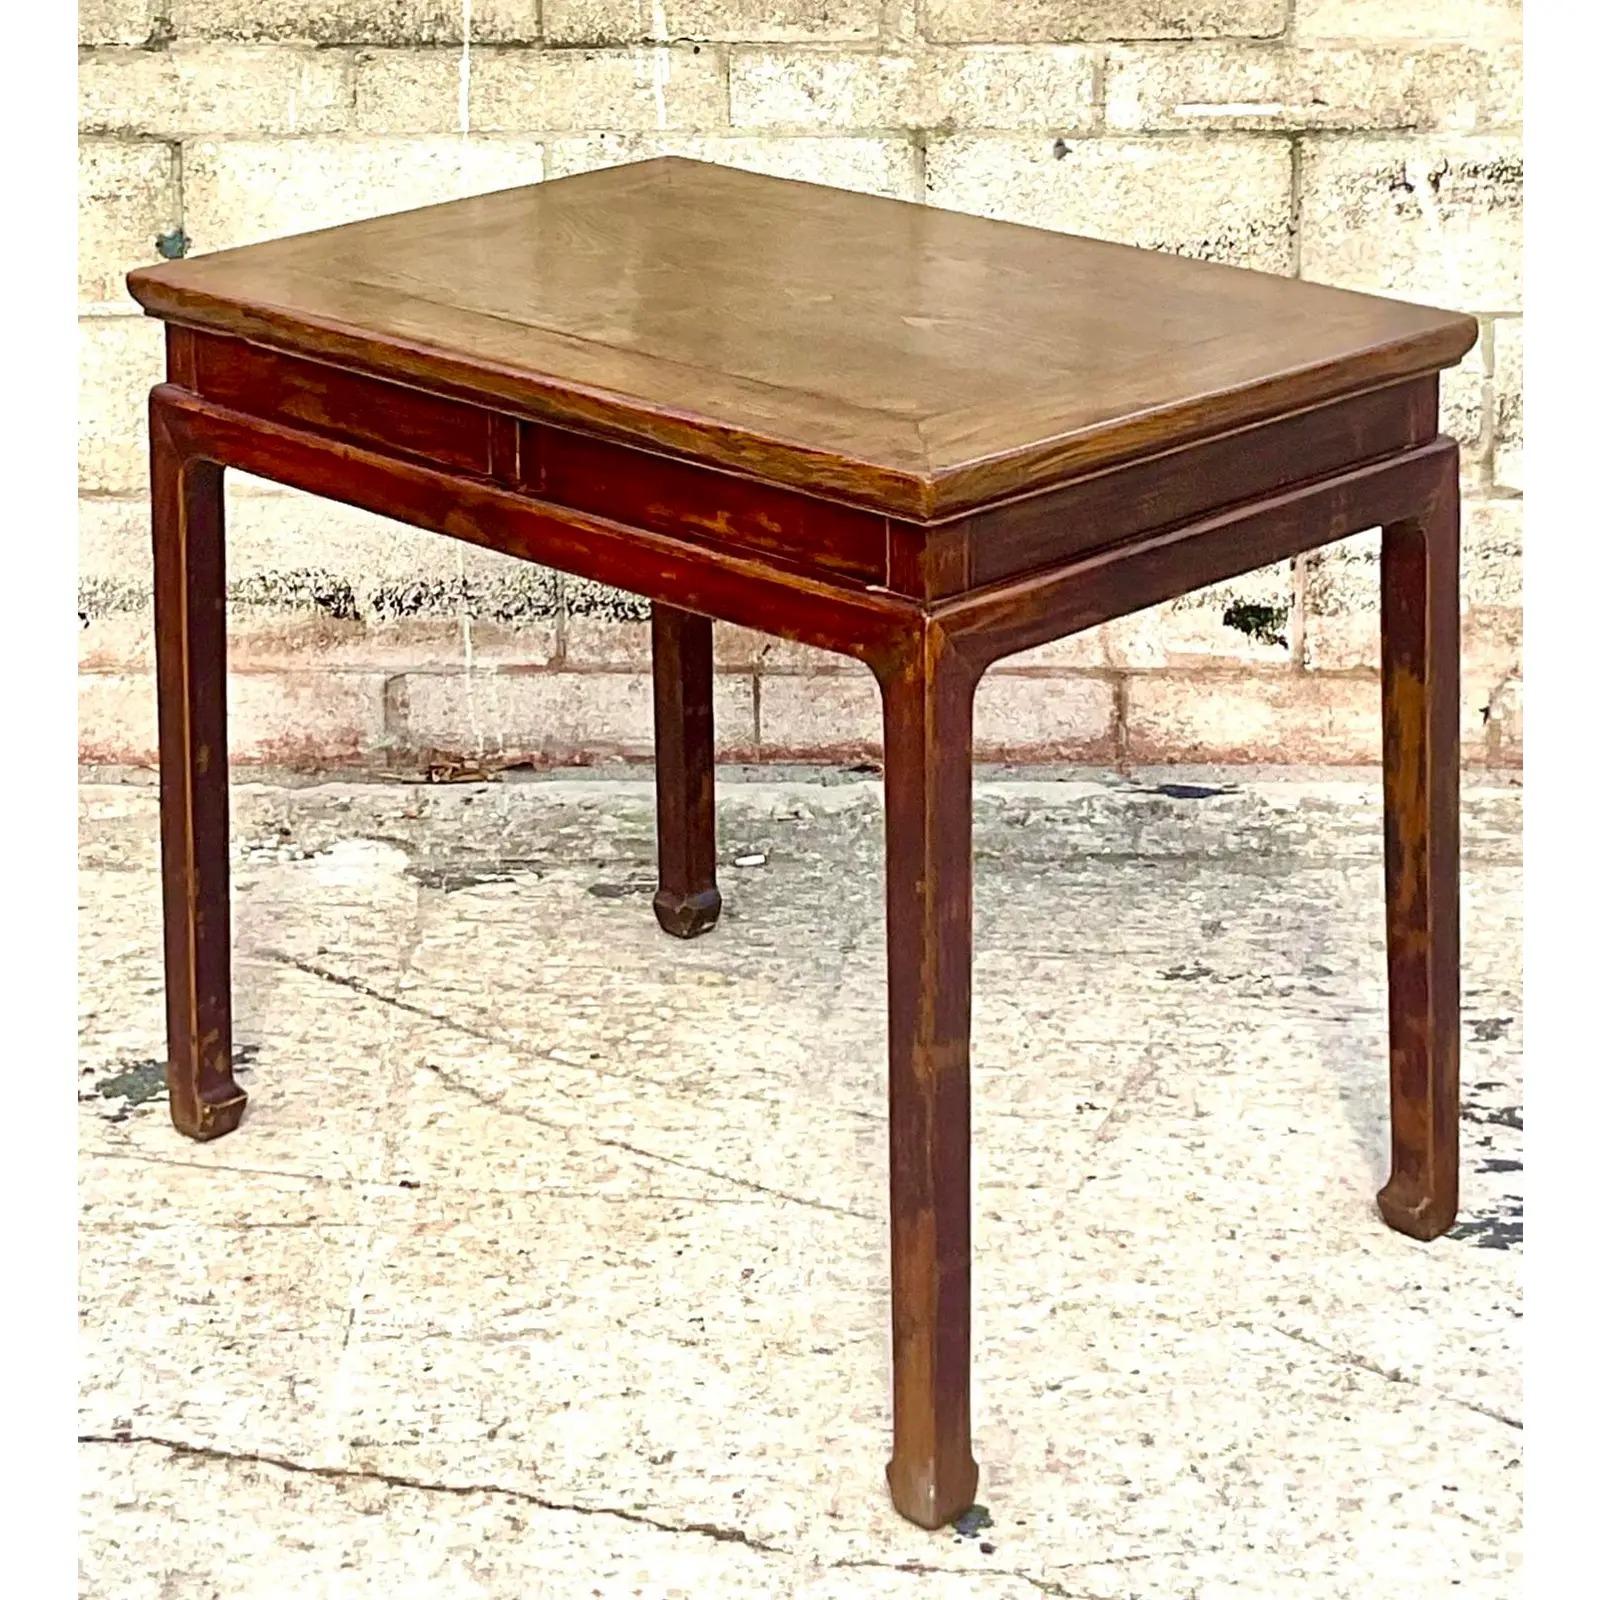 Incredible vintage Asian writing desk. Custom built to the designers specs. Beautiful reclaimed wood finish in warm reddish brown. Hidden drawers that open from below. Just so chic. Acquired from a Palm Beach estate.